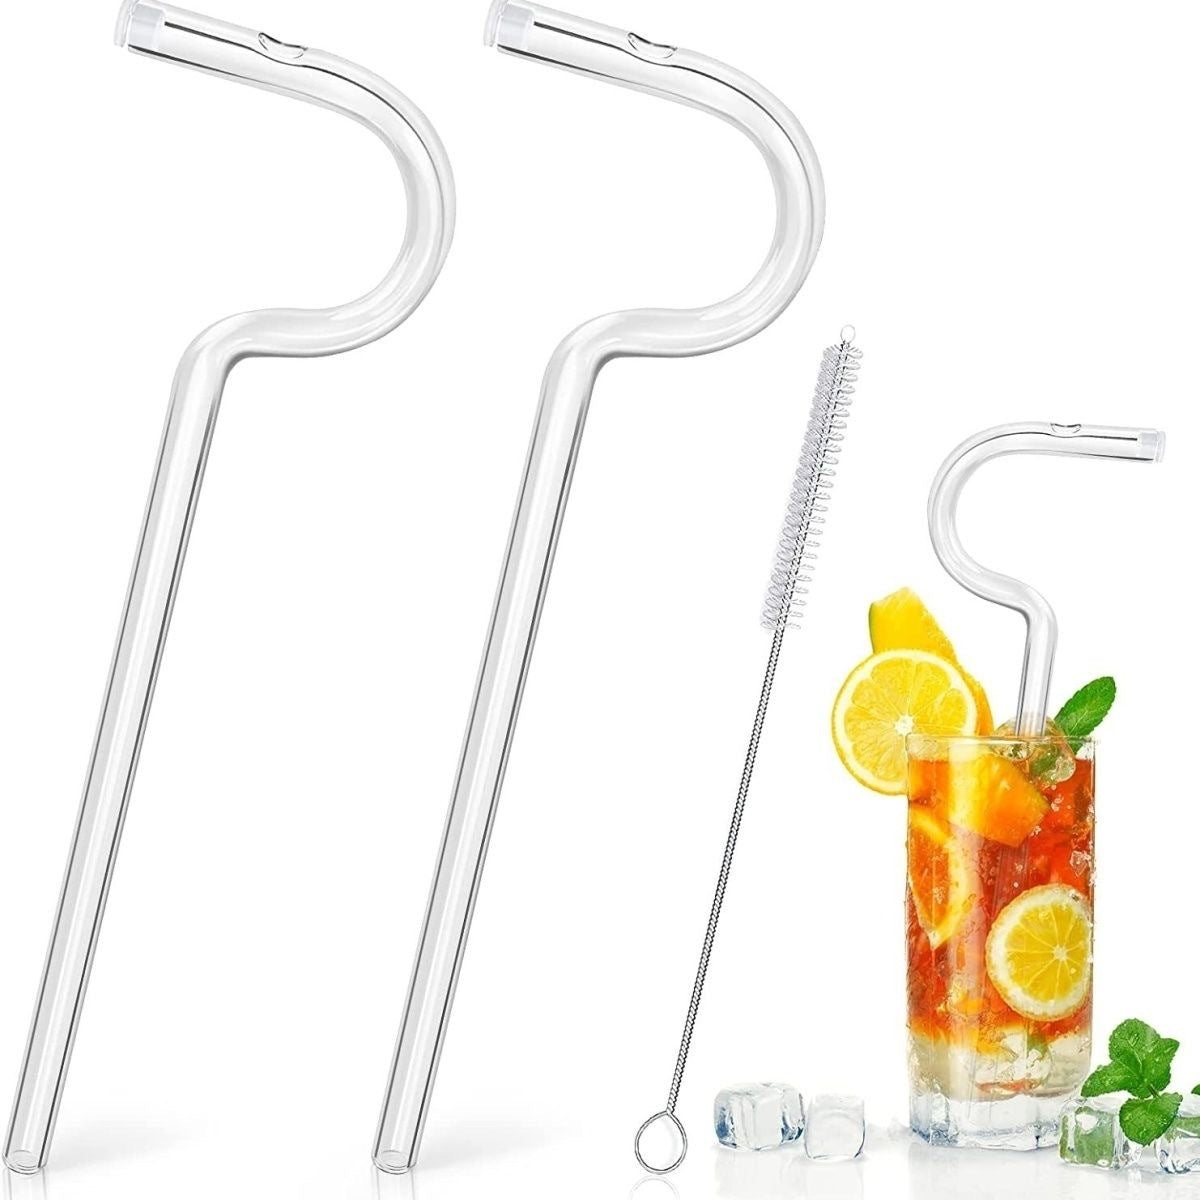 2straw 1cleaningbrush Can Be Used Repeatedly Original Glass Drinking Straw, Flute Style Design For Engaging Lips Horizontally, Anti Wrinkle.